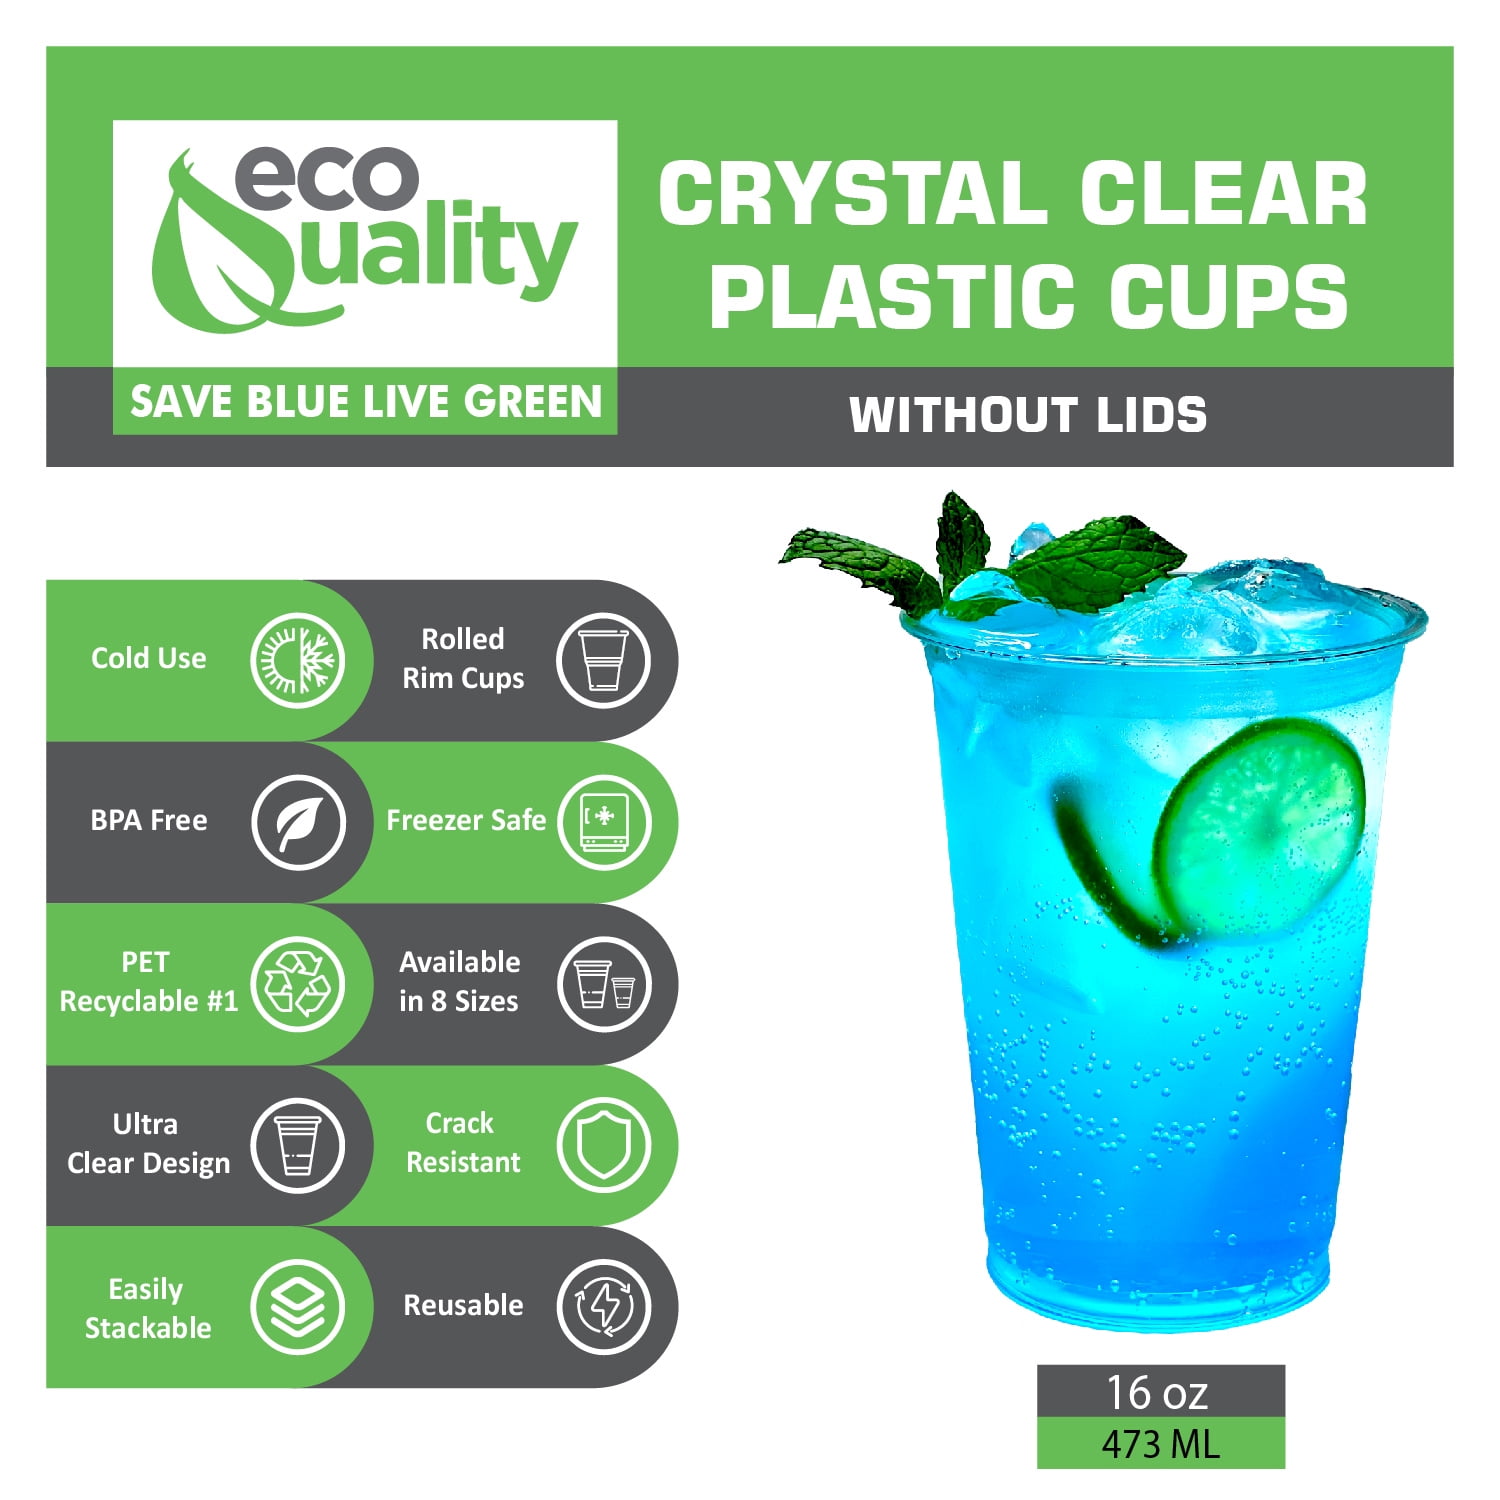 Custom Clear Plastic Cup - 16 Oz PET Plastic Cup for Cold Beverages